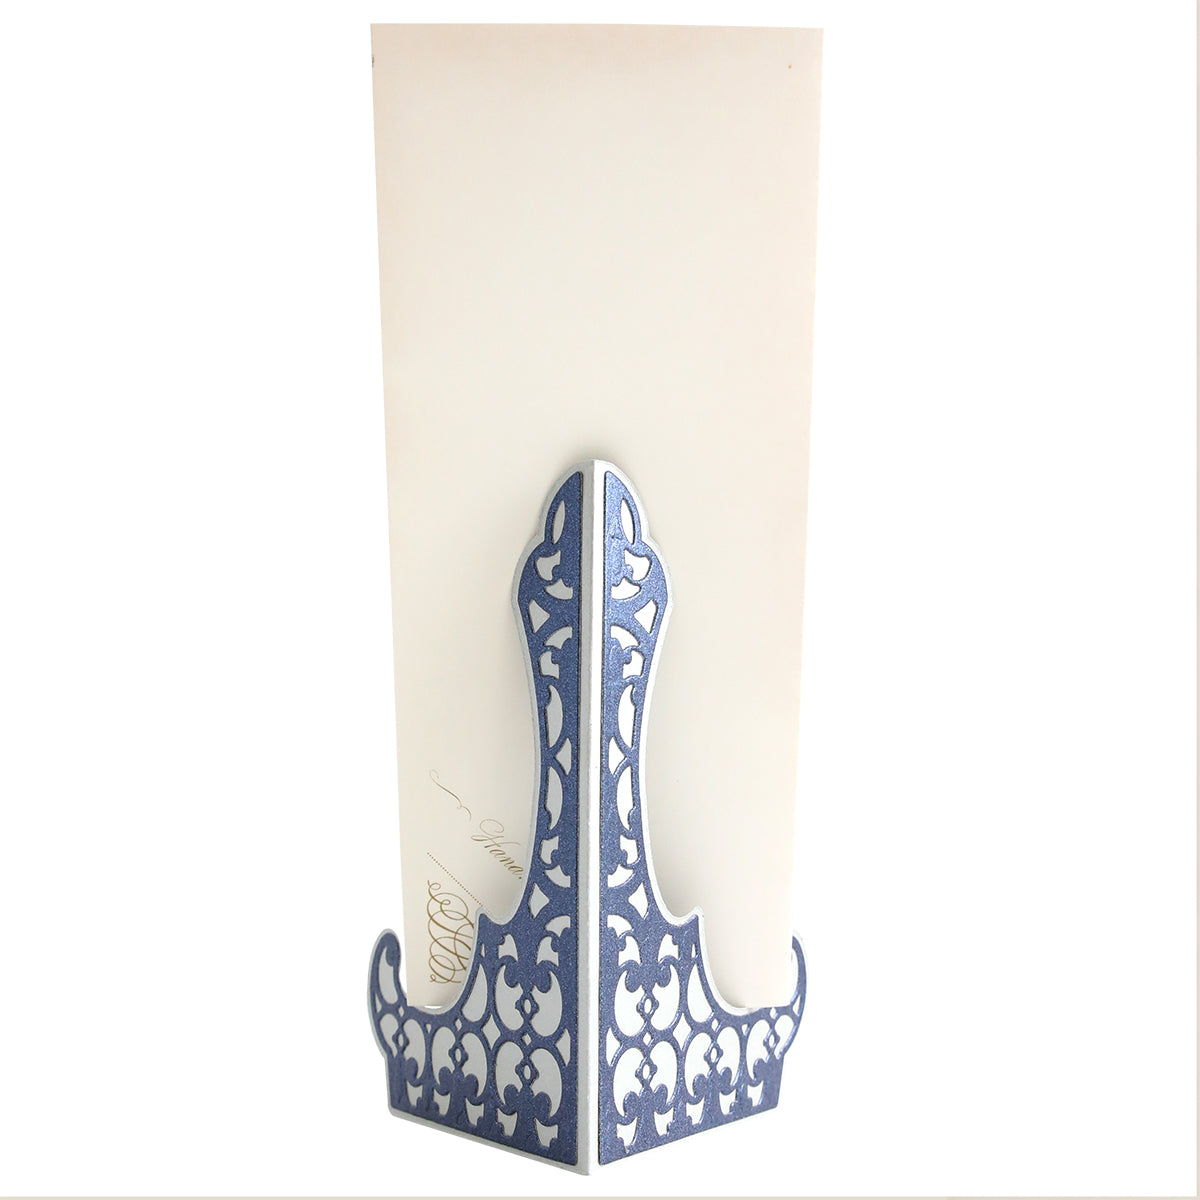 An oversized blue and white Tall Card Stand Dies with an eagle on it.